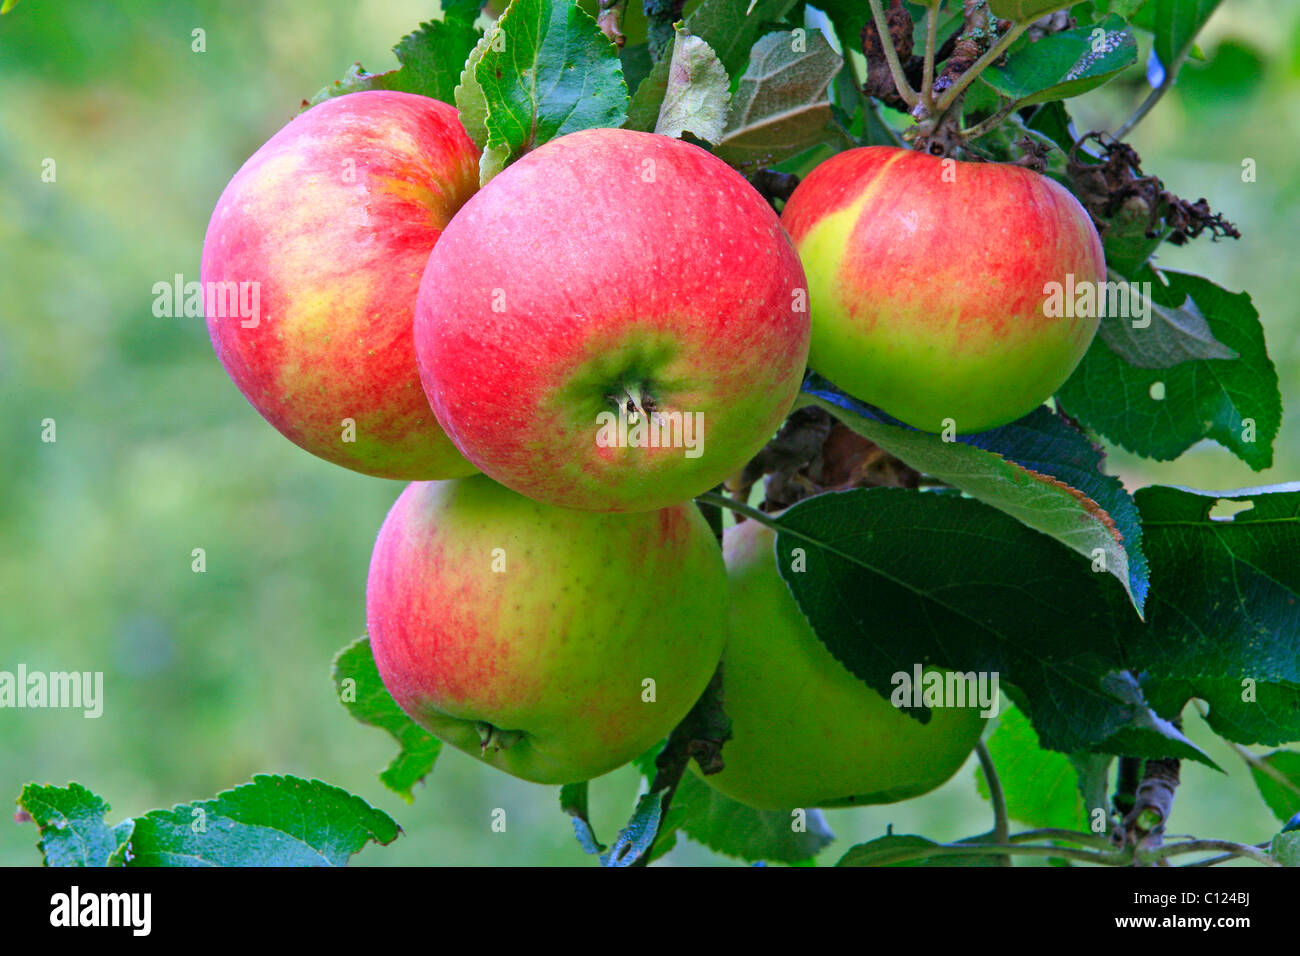 Red apples hanging from a tree Stock Photo